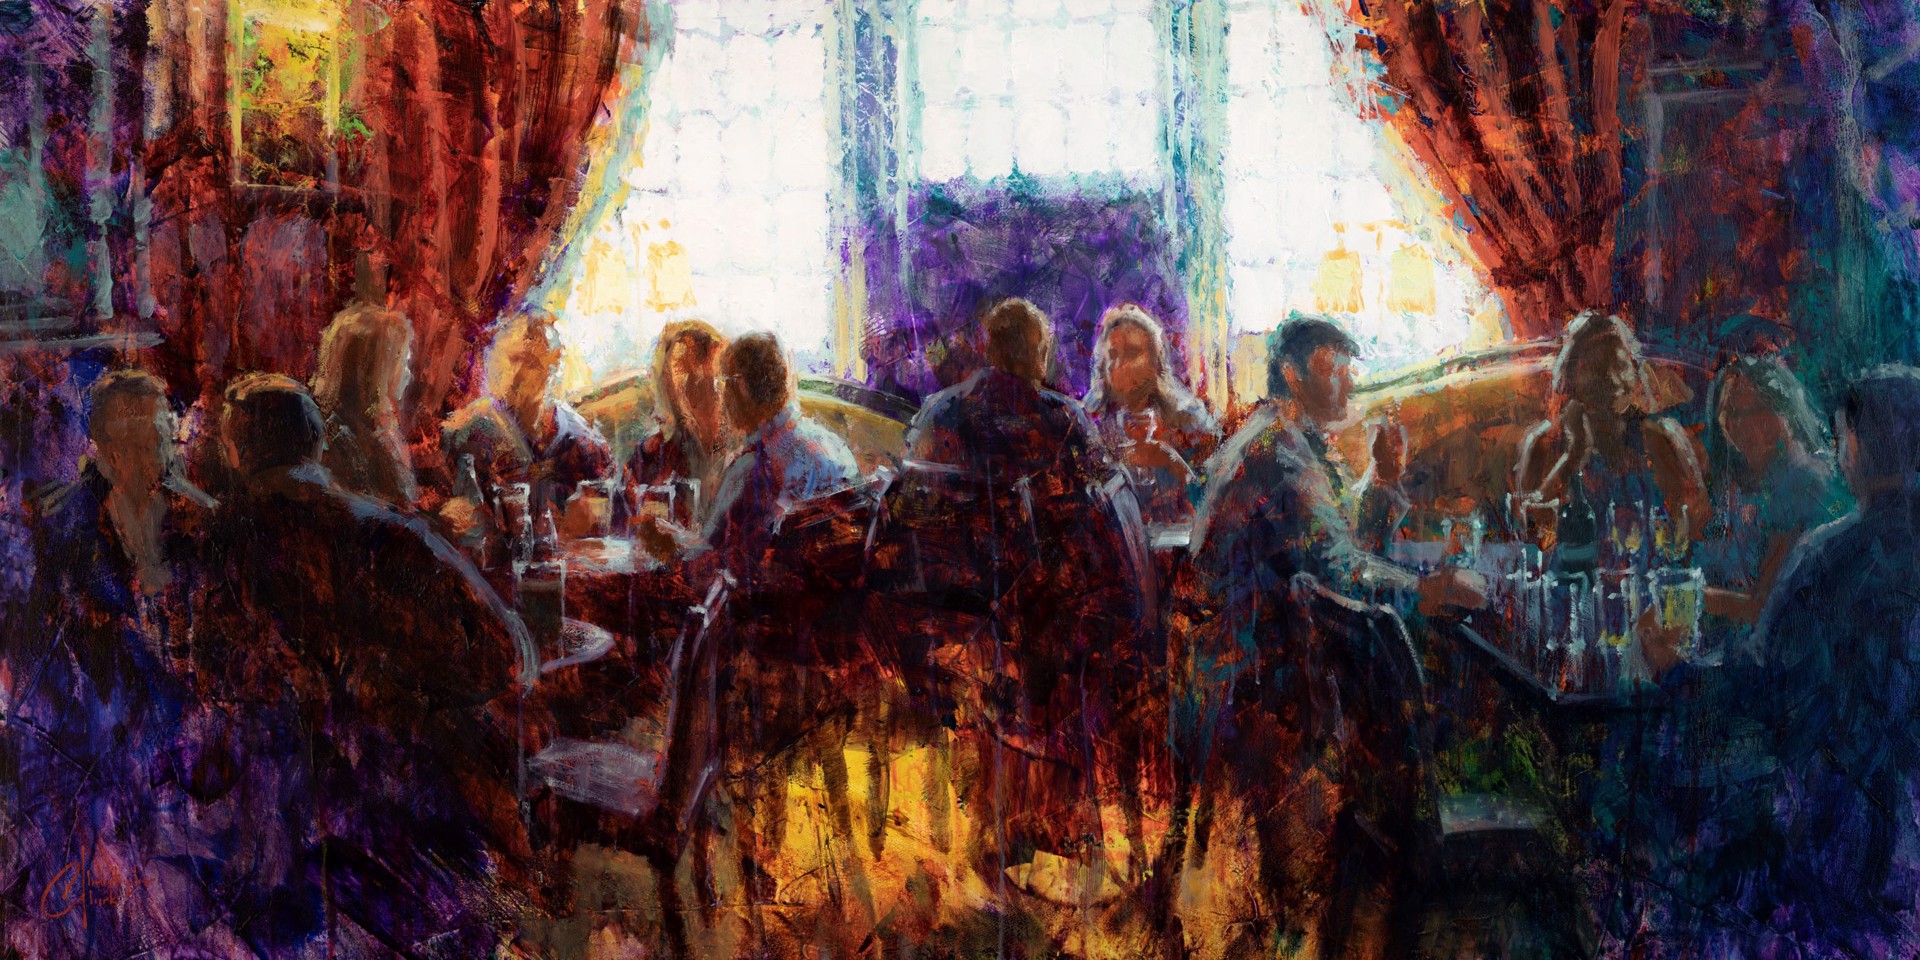 Pub with Friends by Christopher Clark